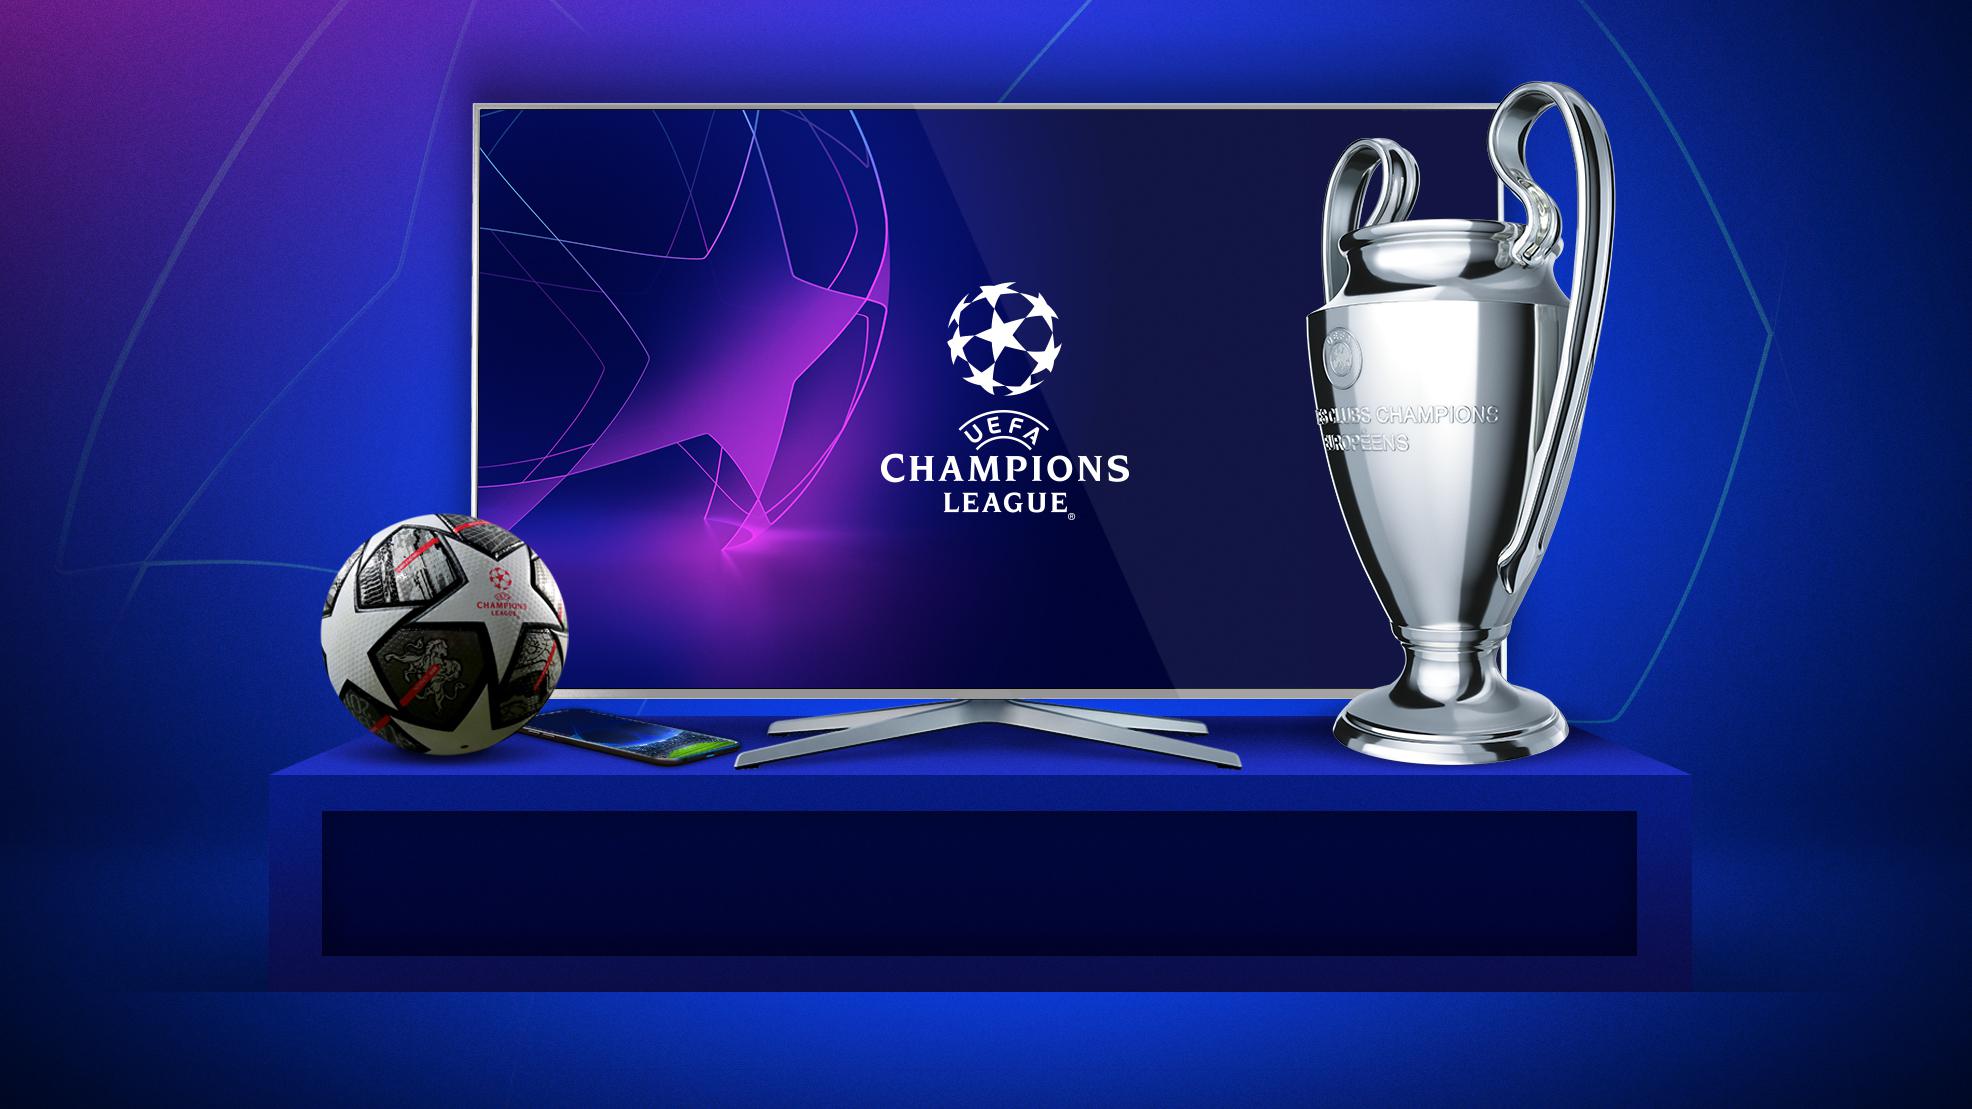 the Champions League